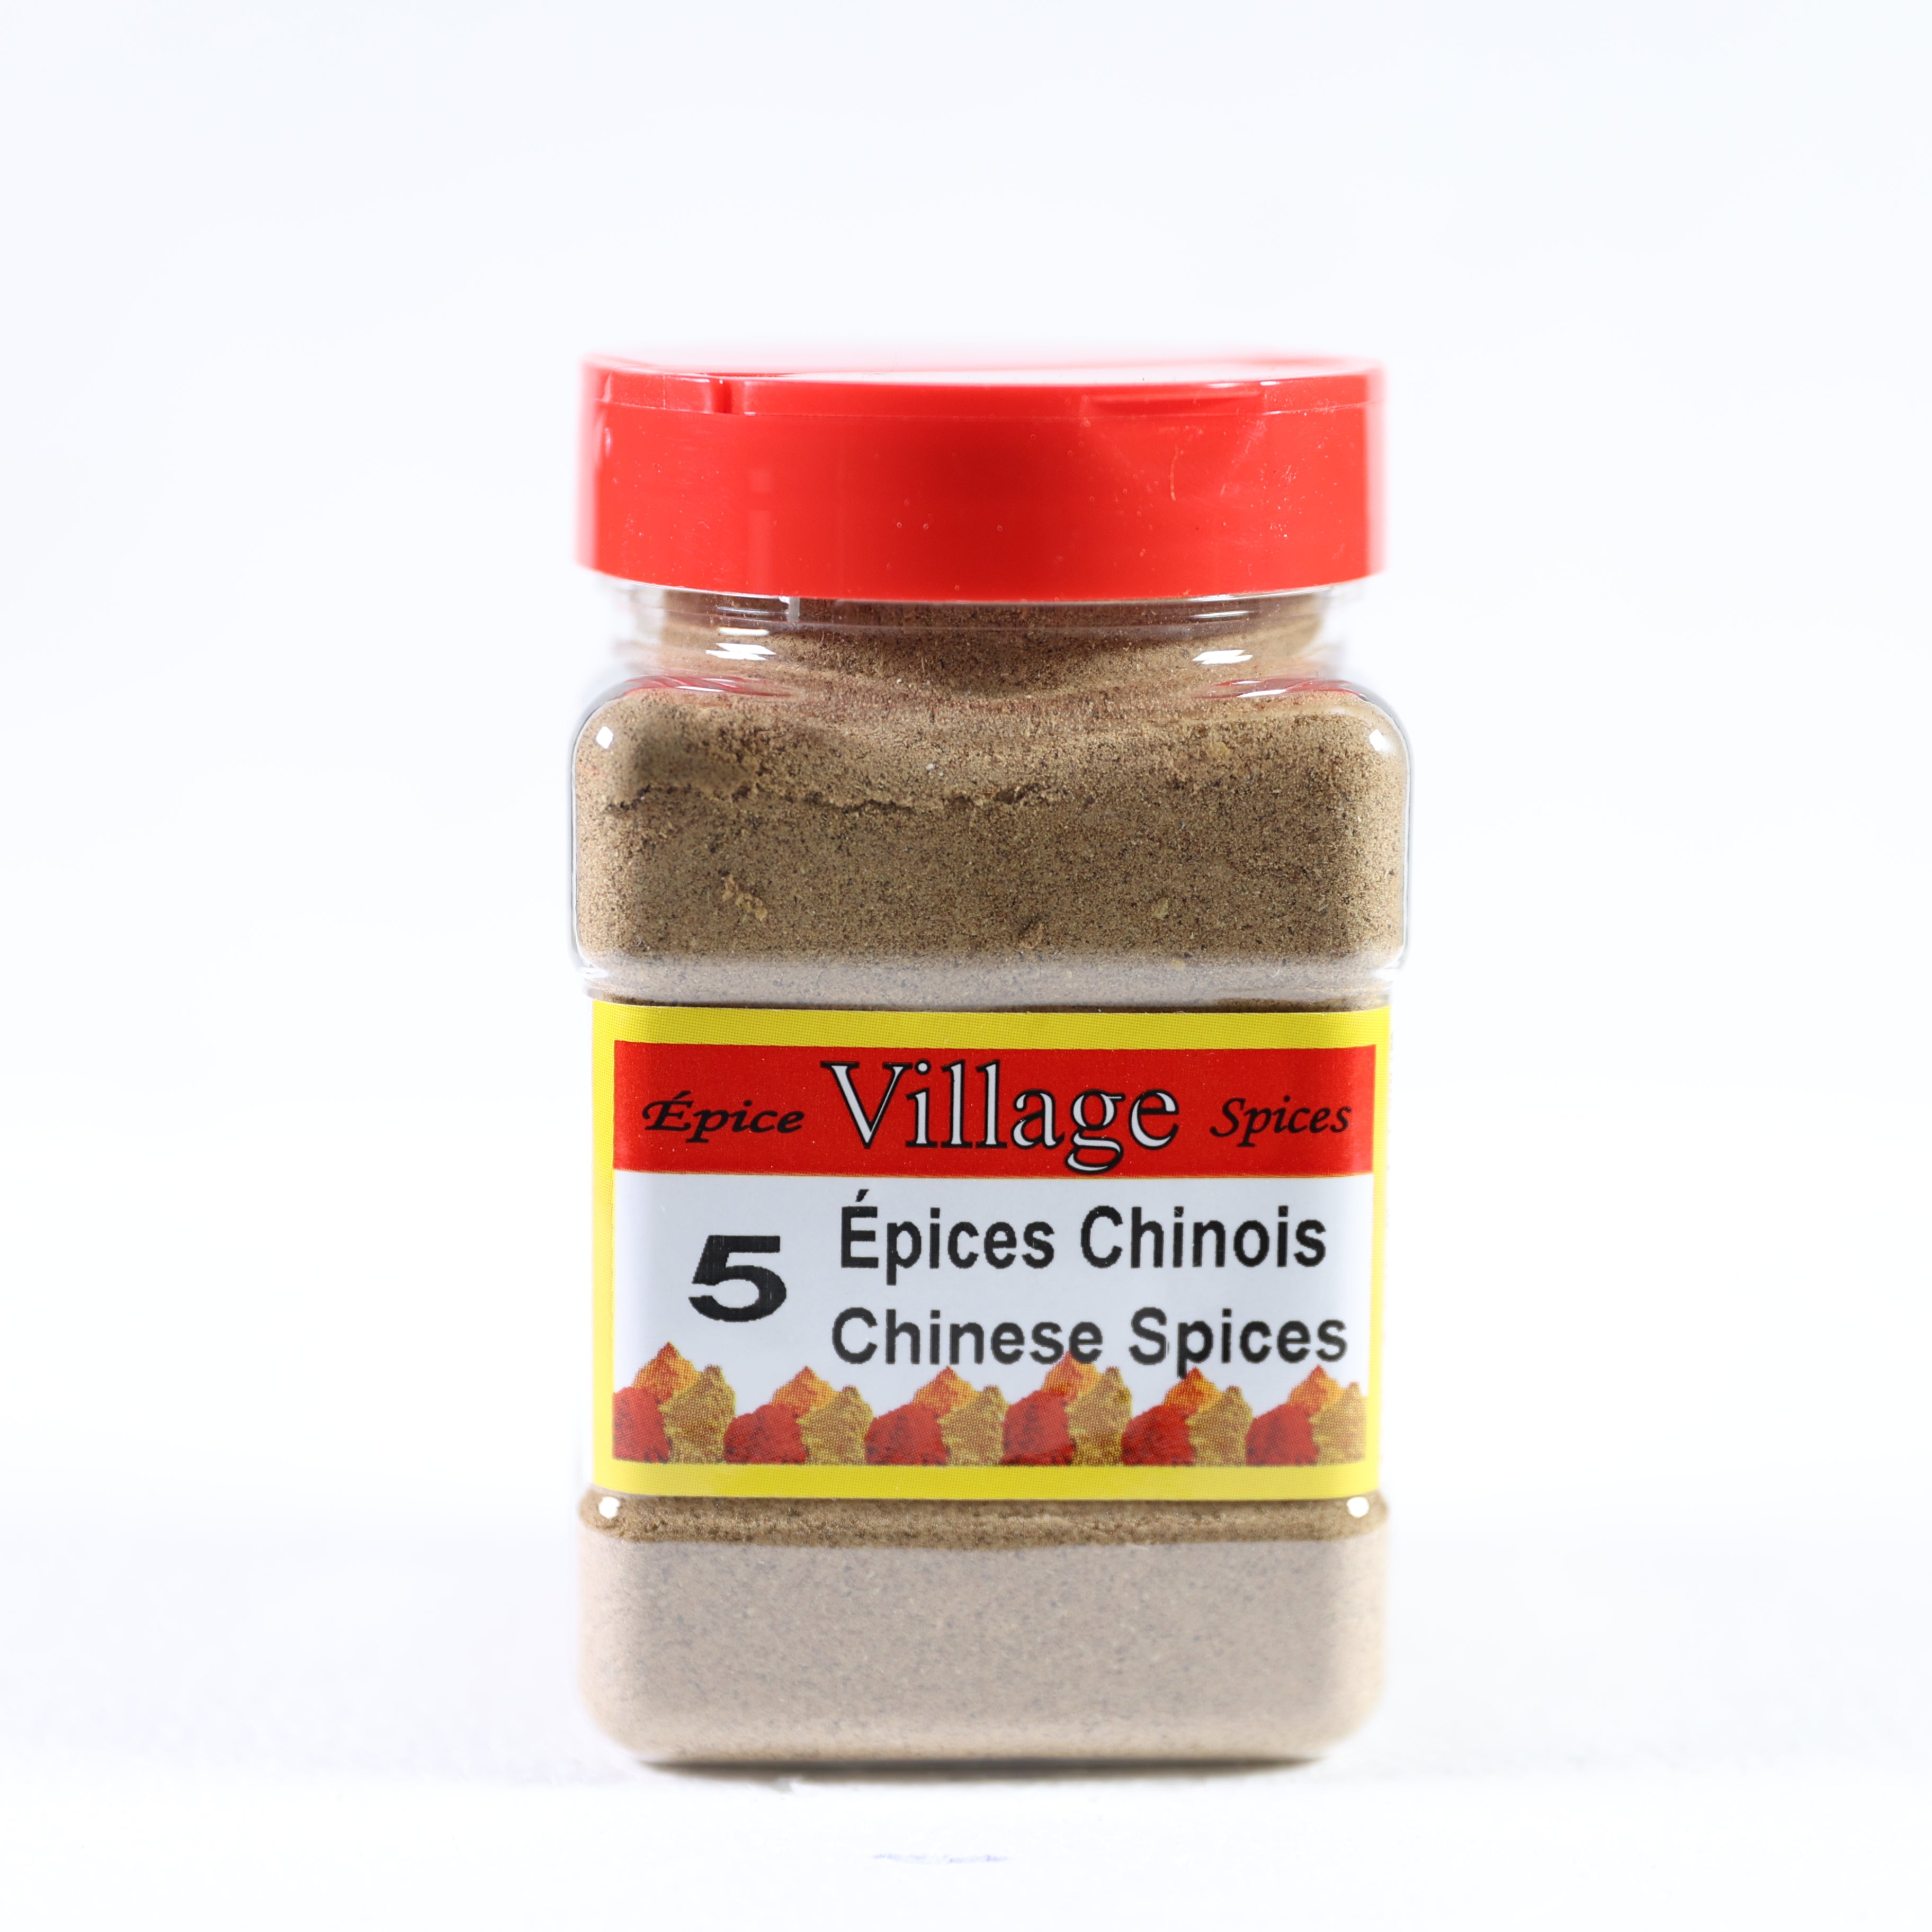 5 Chinese Spices